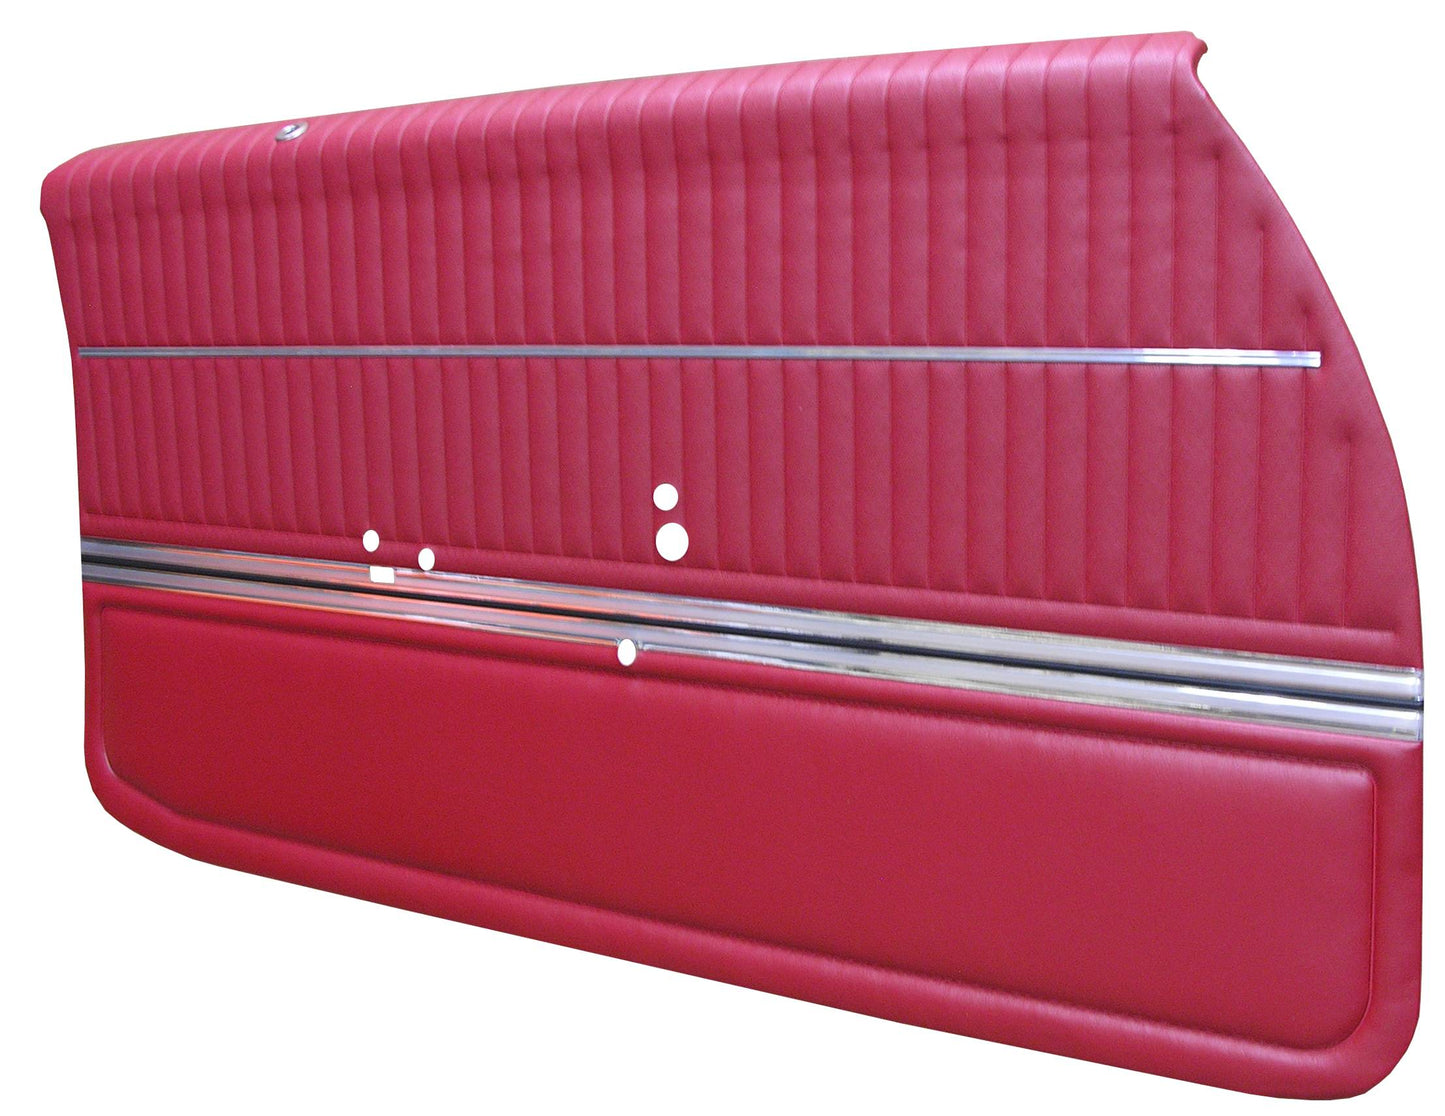 68 CUTLASS S/442 HOLIDAY CPE ASMBLD DOOR PANELS - RED